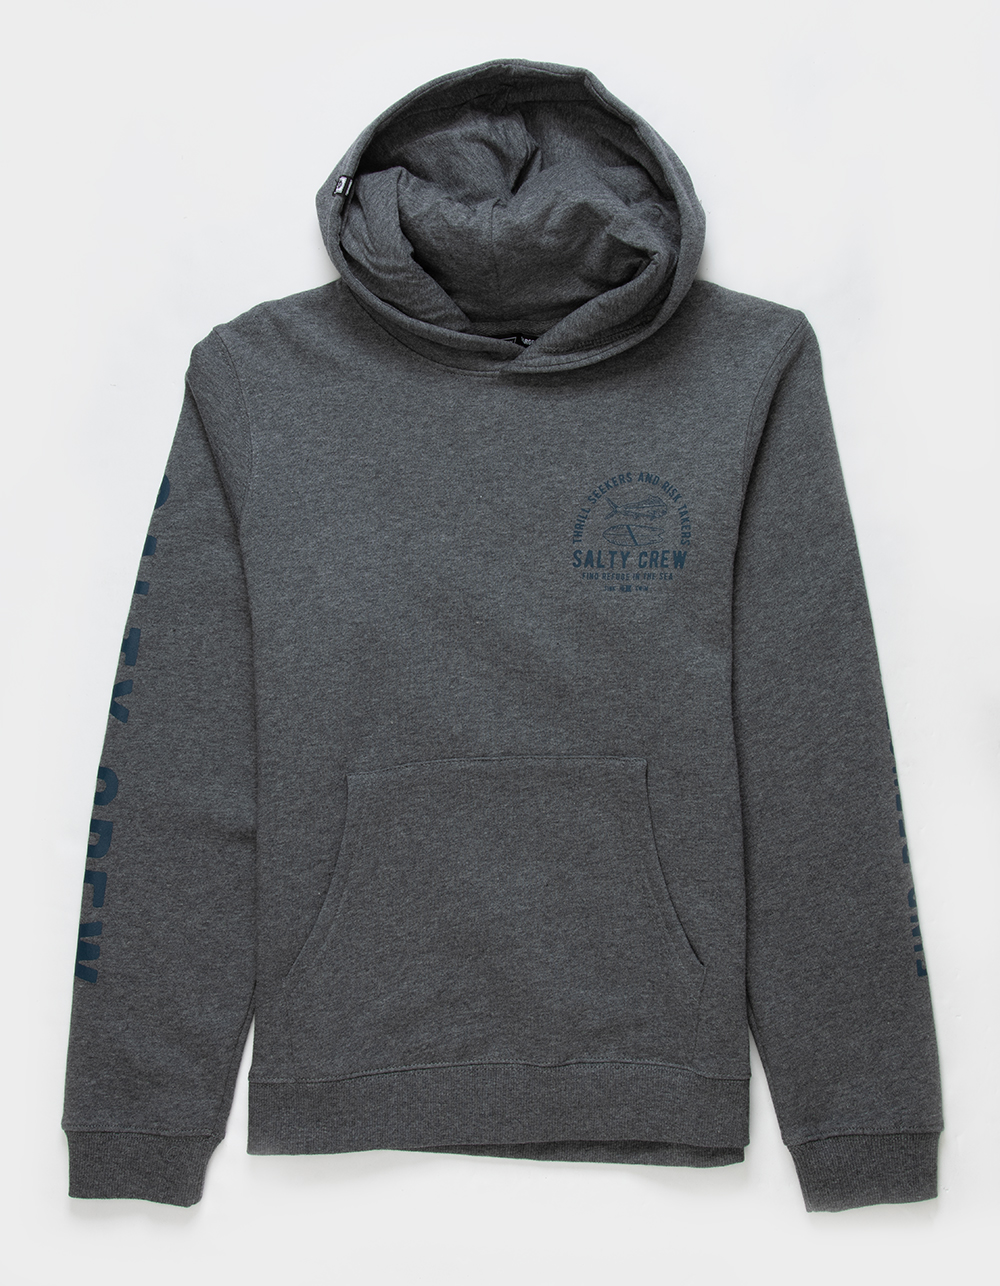 SALTY CREW Lateral Line Boys Hoodie - GRAY | Tillys